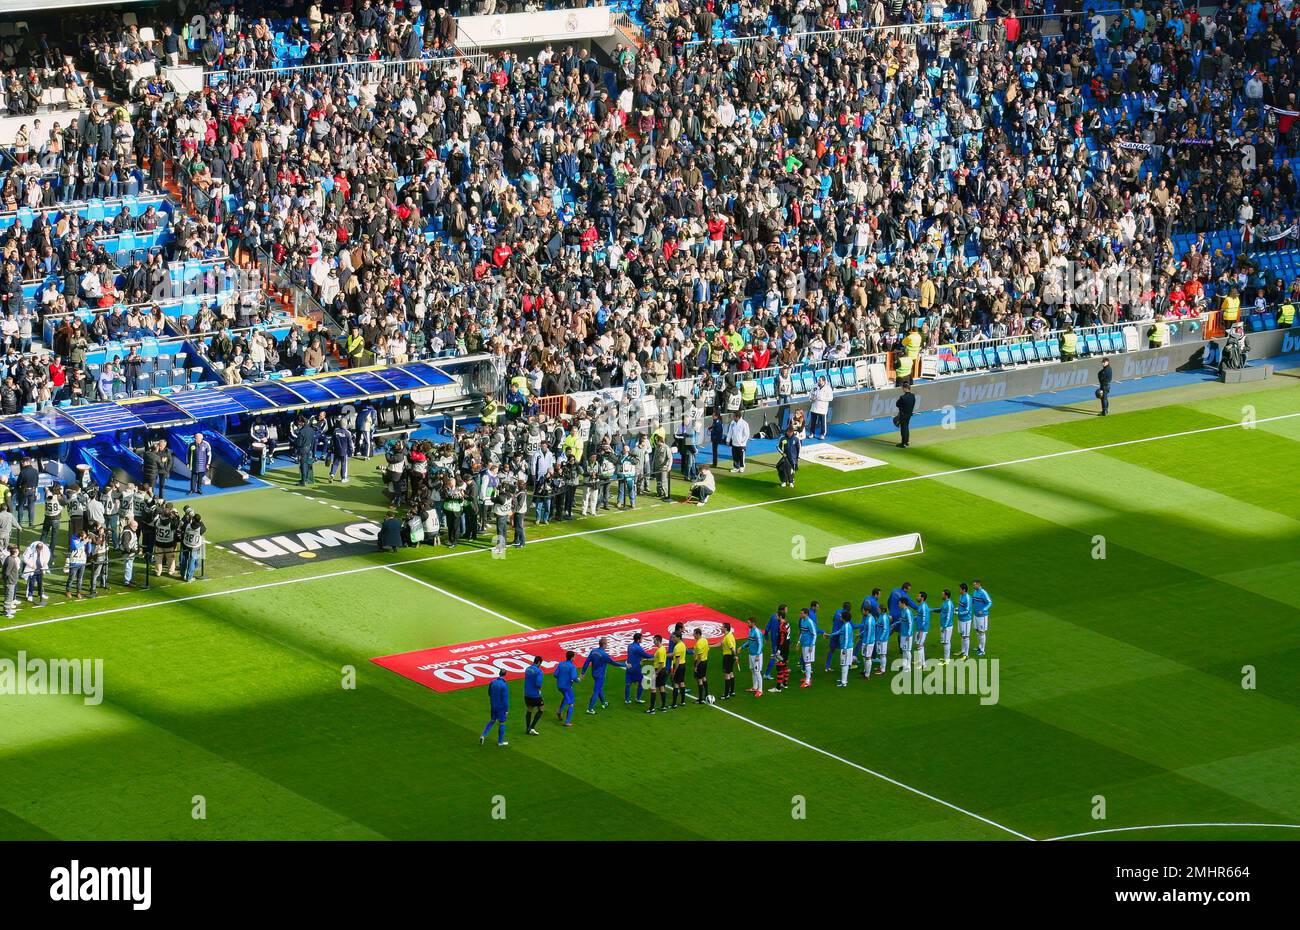 Secretary General of the United Nations Ban Ki-moon promoting a poverty campaign at Real Madrid v Levante Bernabeu Stadium Madrid Spain 6 April 2013 Stock Photo